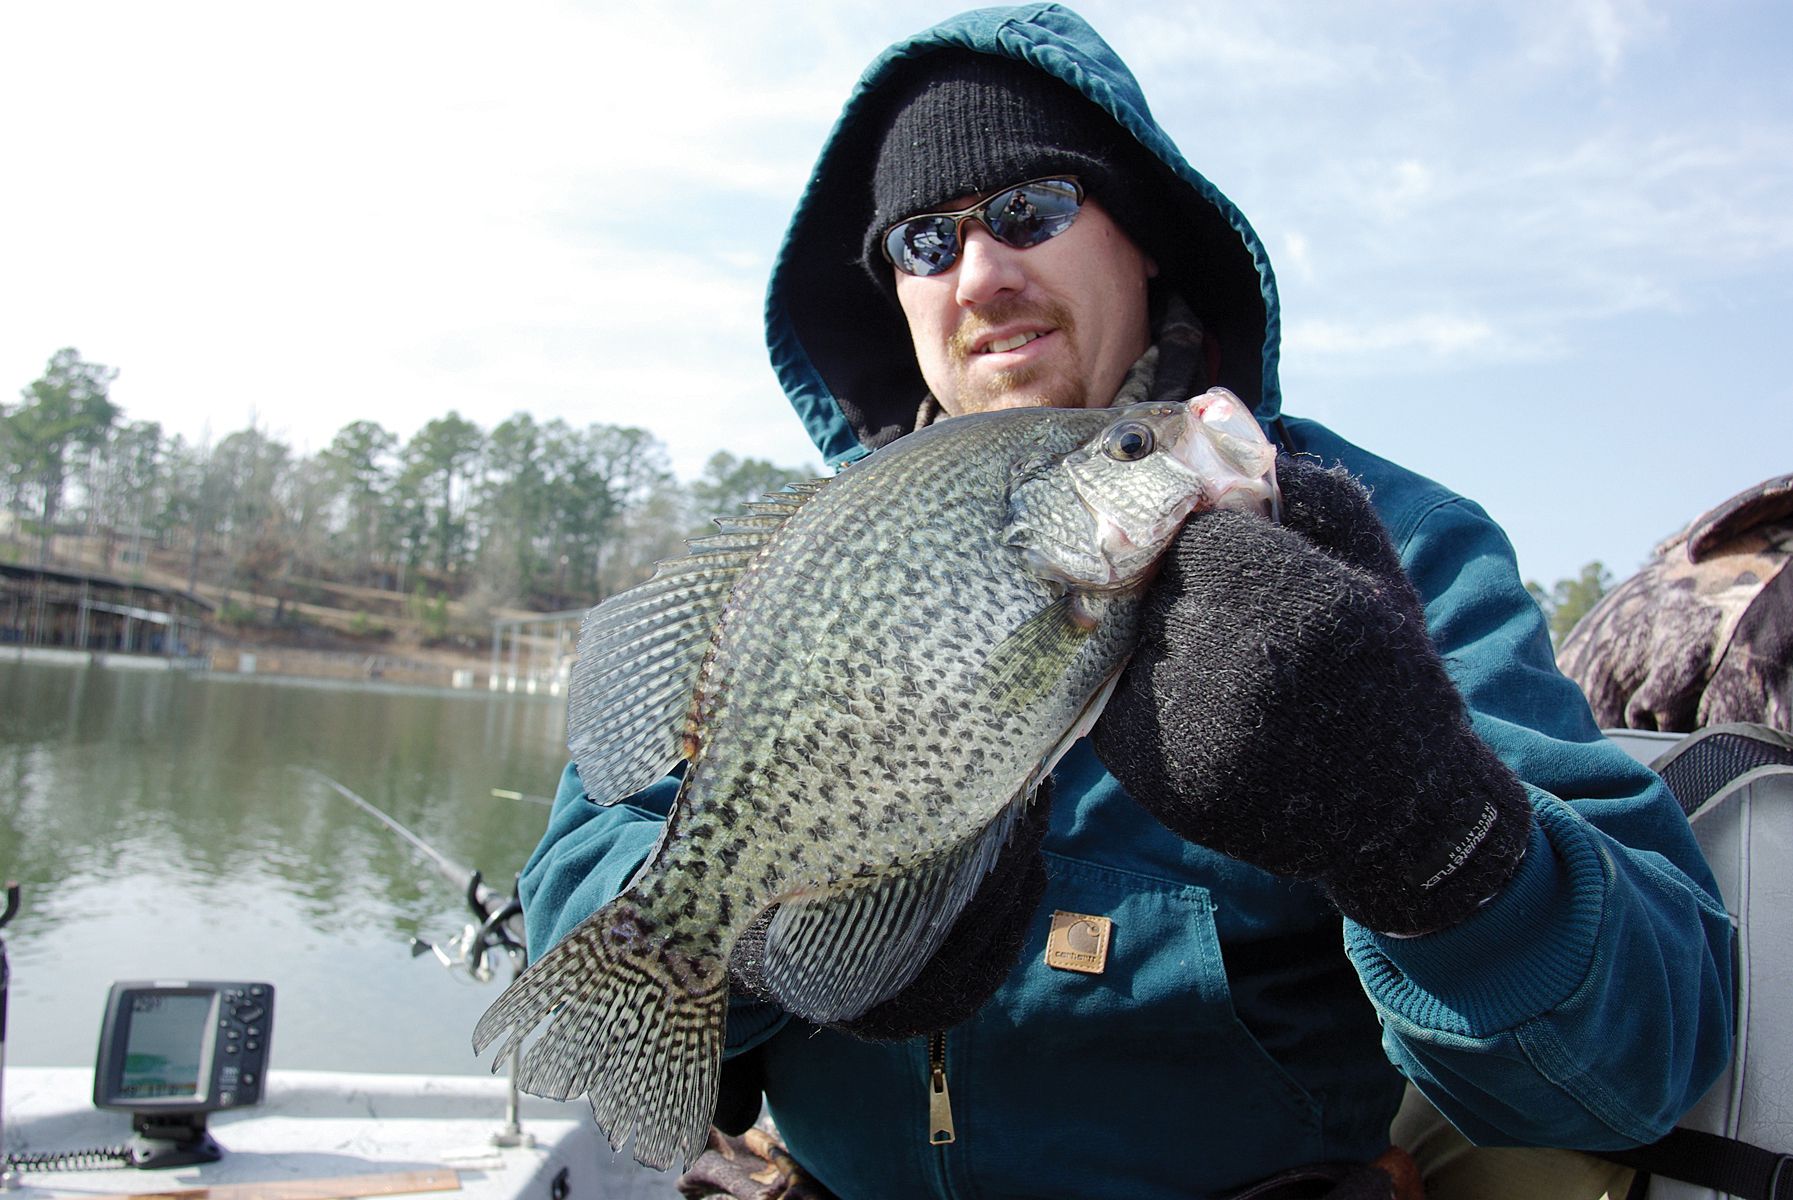 Try out these tips for catching bluegill and crappie! #fishing